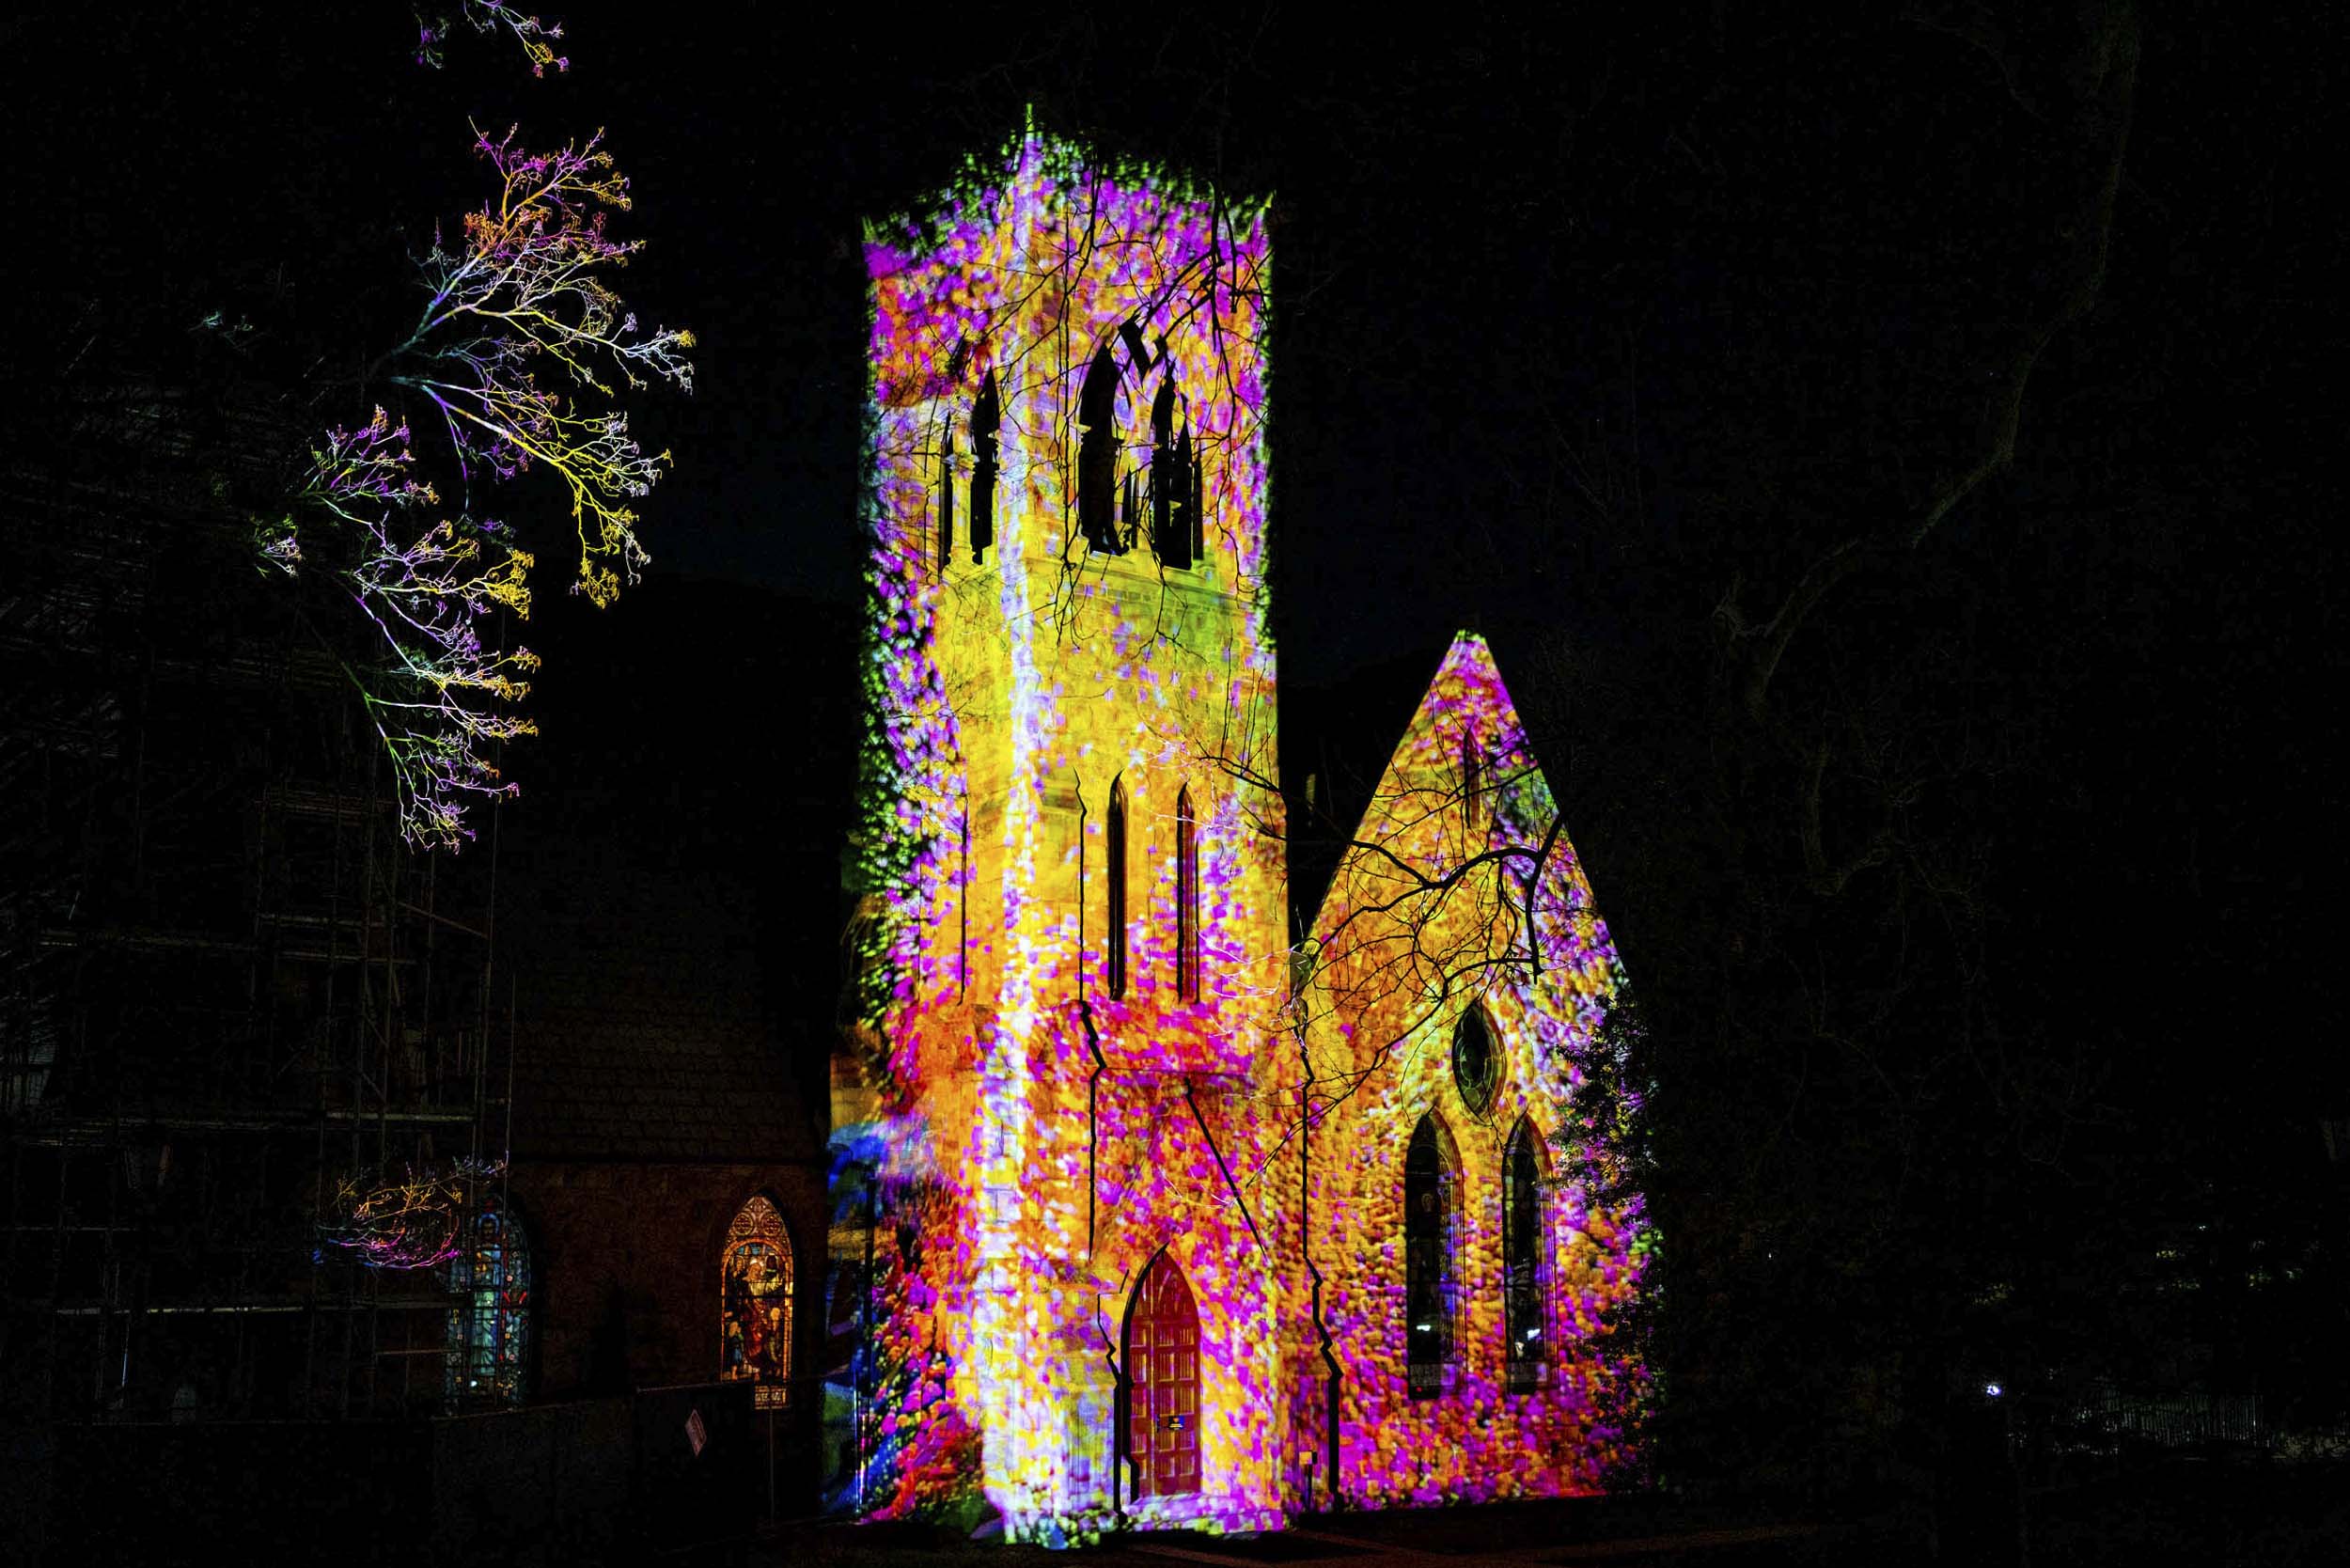 UVA Chapel Bell tower having multiple colors projected onto it.